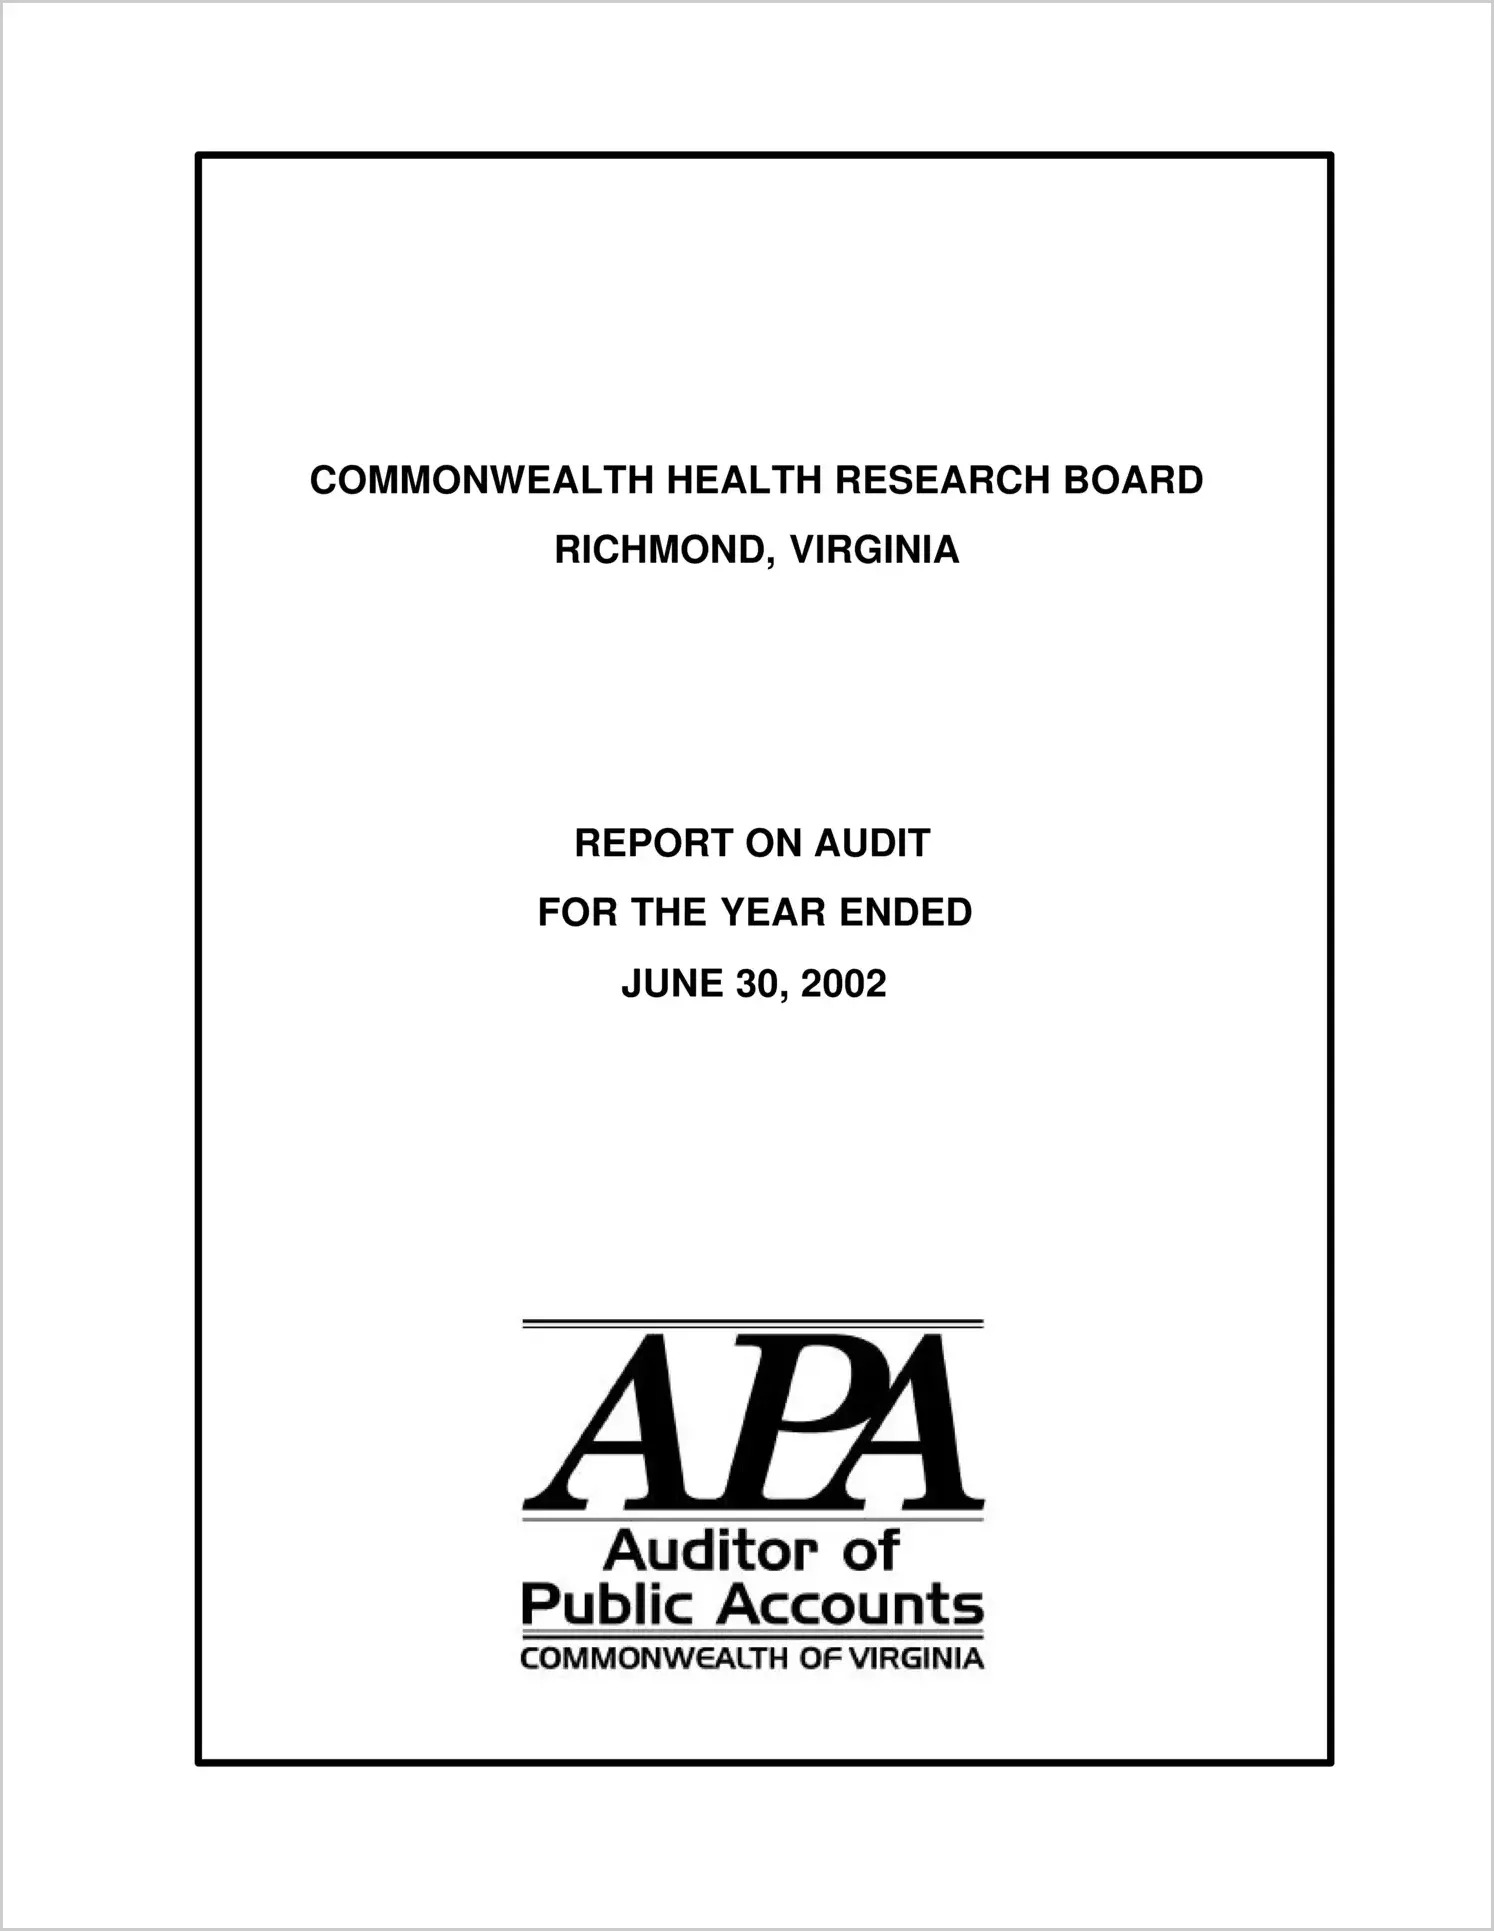 Commonwealth Health Research Board for the year ended June 30, 2002